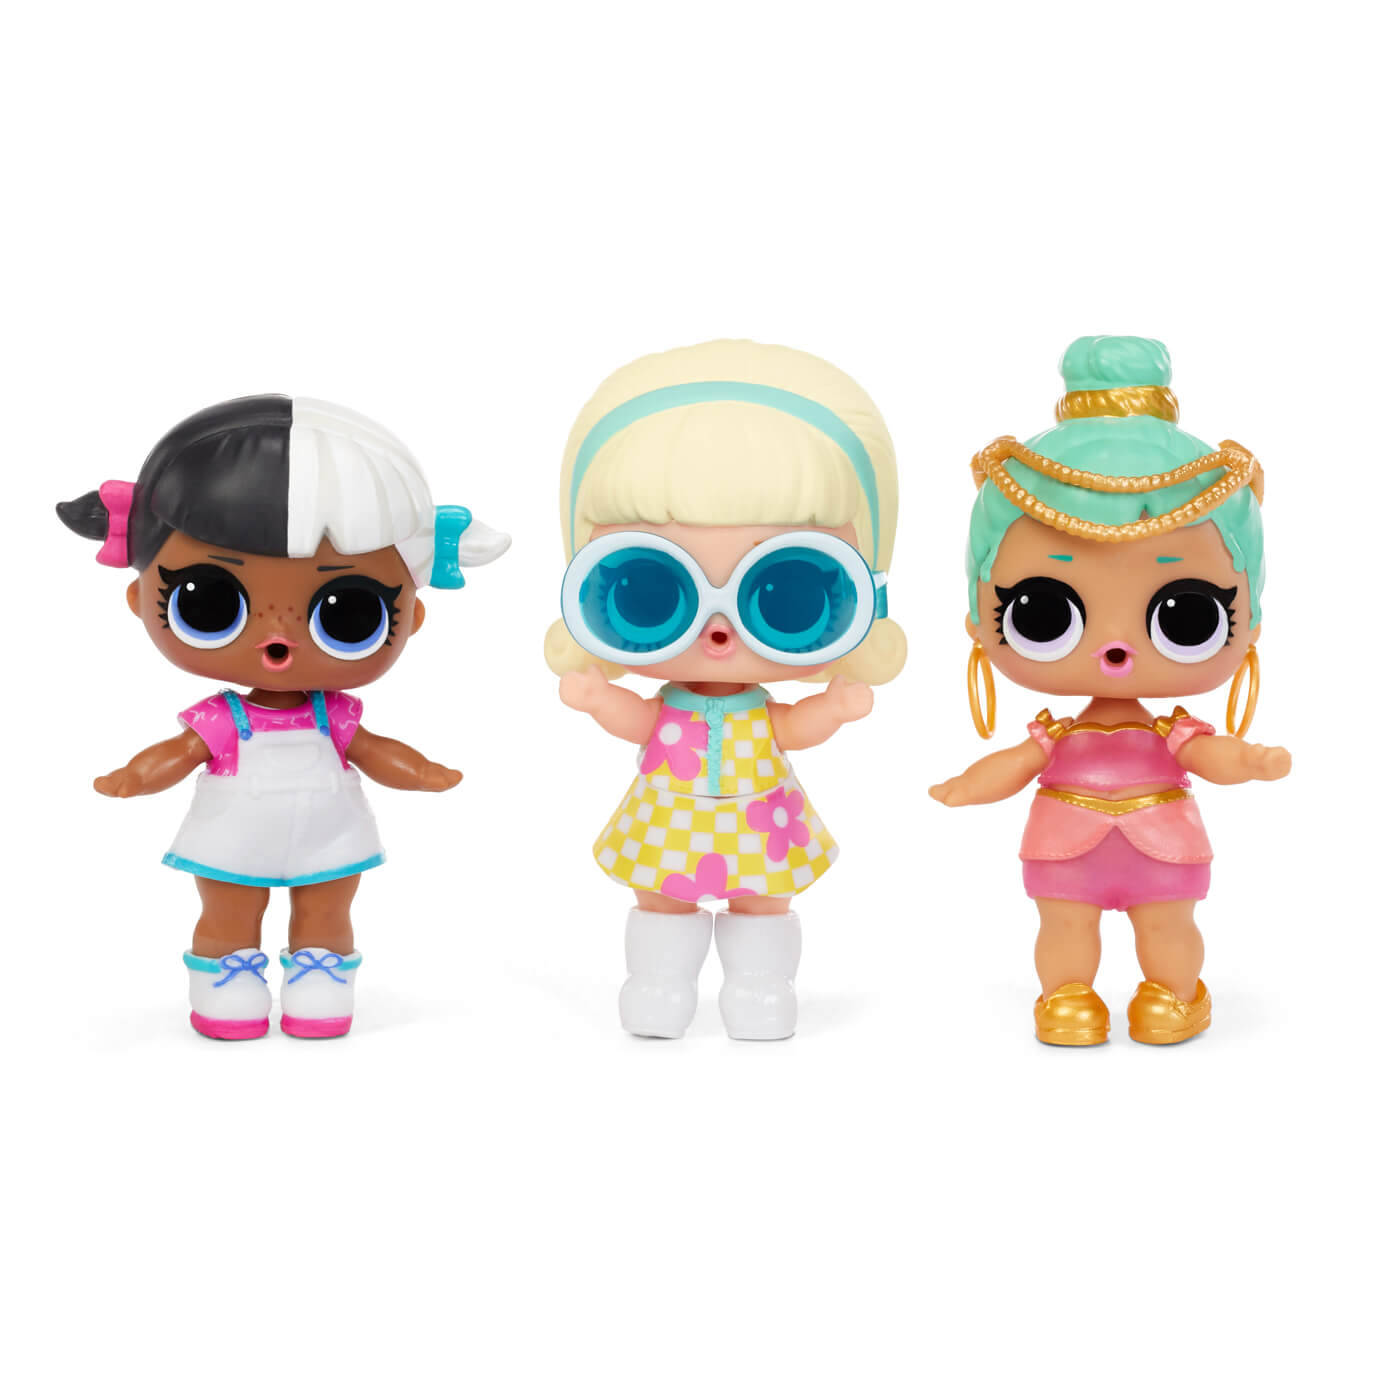 A Group Of Dolls With Sunglasses And Hair